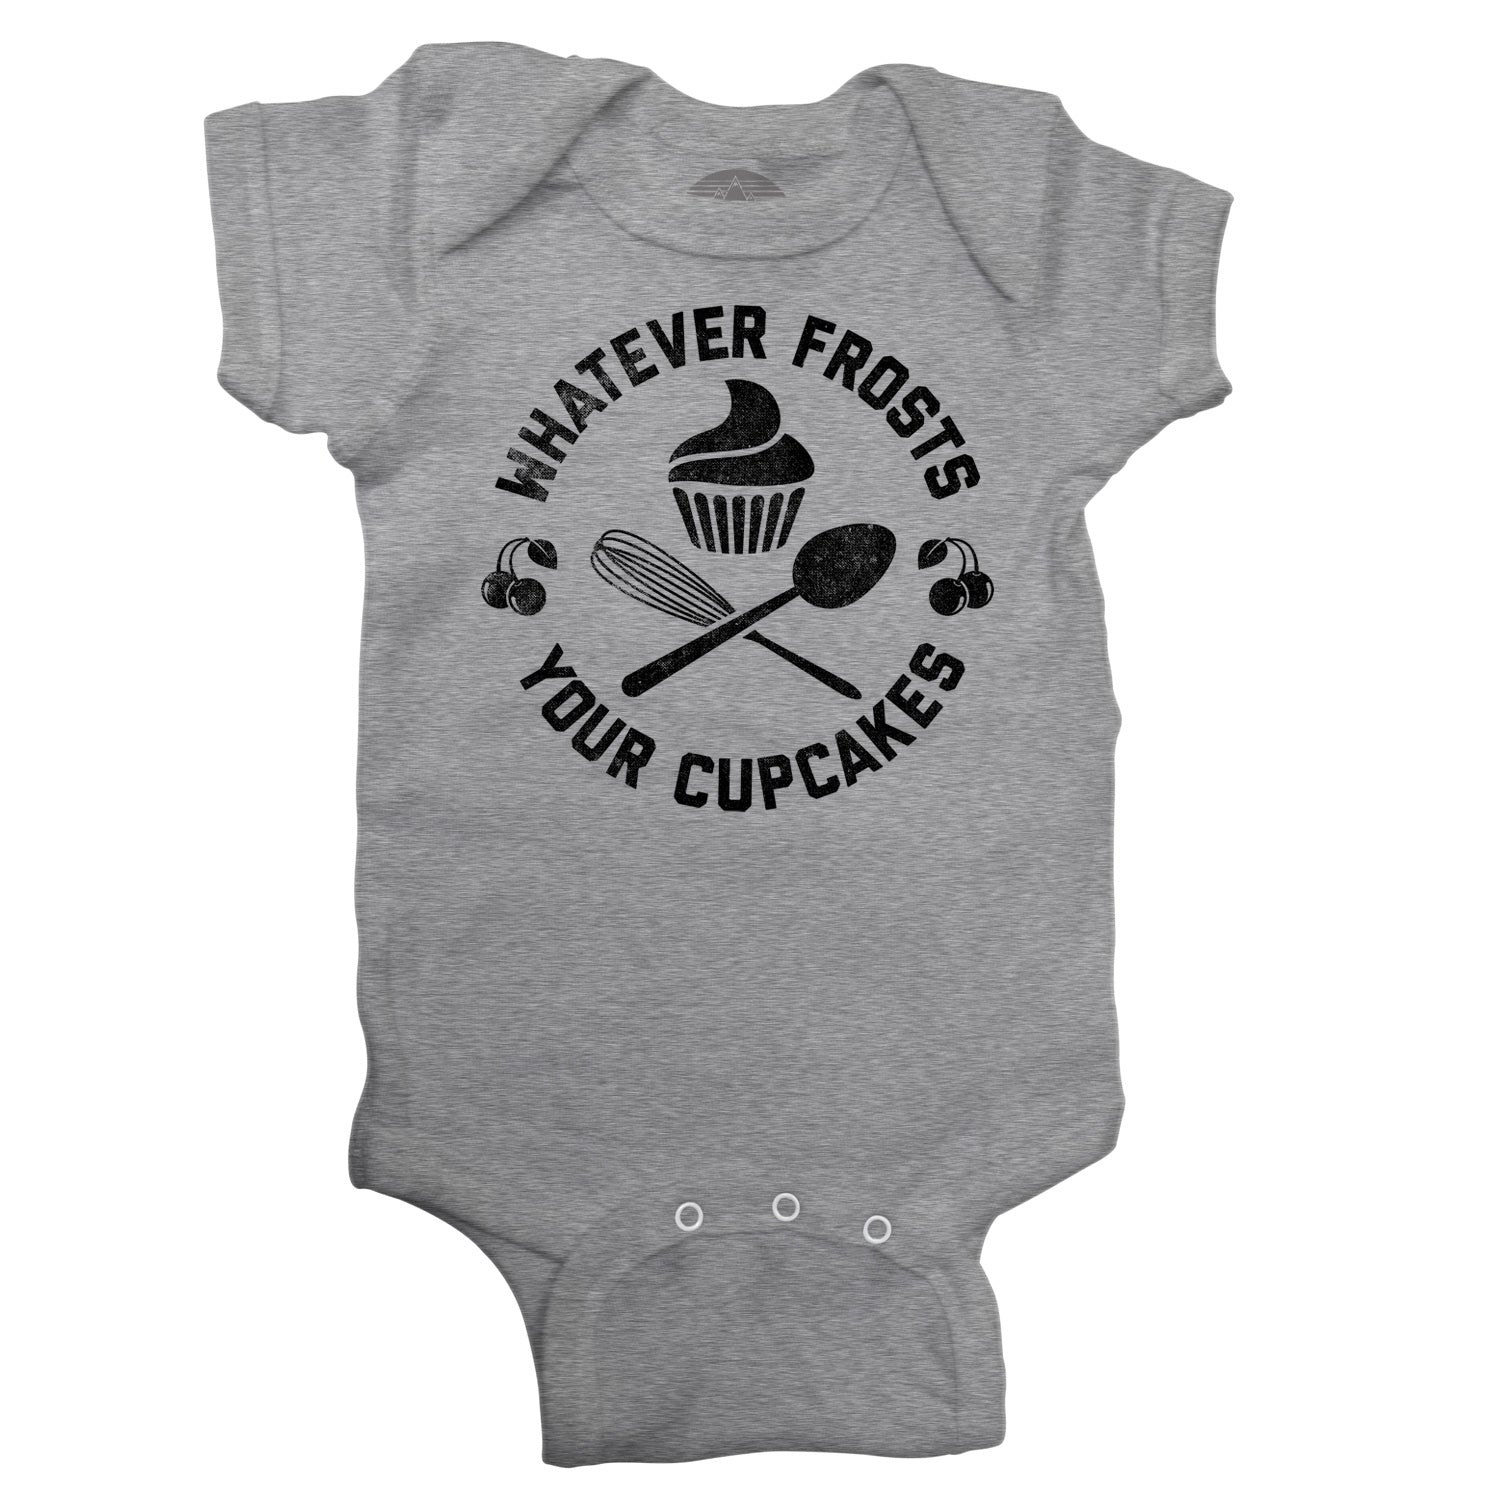 Whatever Frosts Your Cupcakes Infant Bodysuit - Unisex Fit